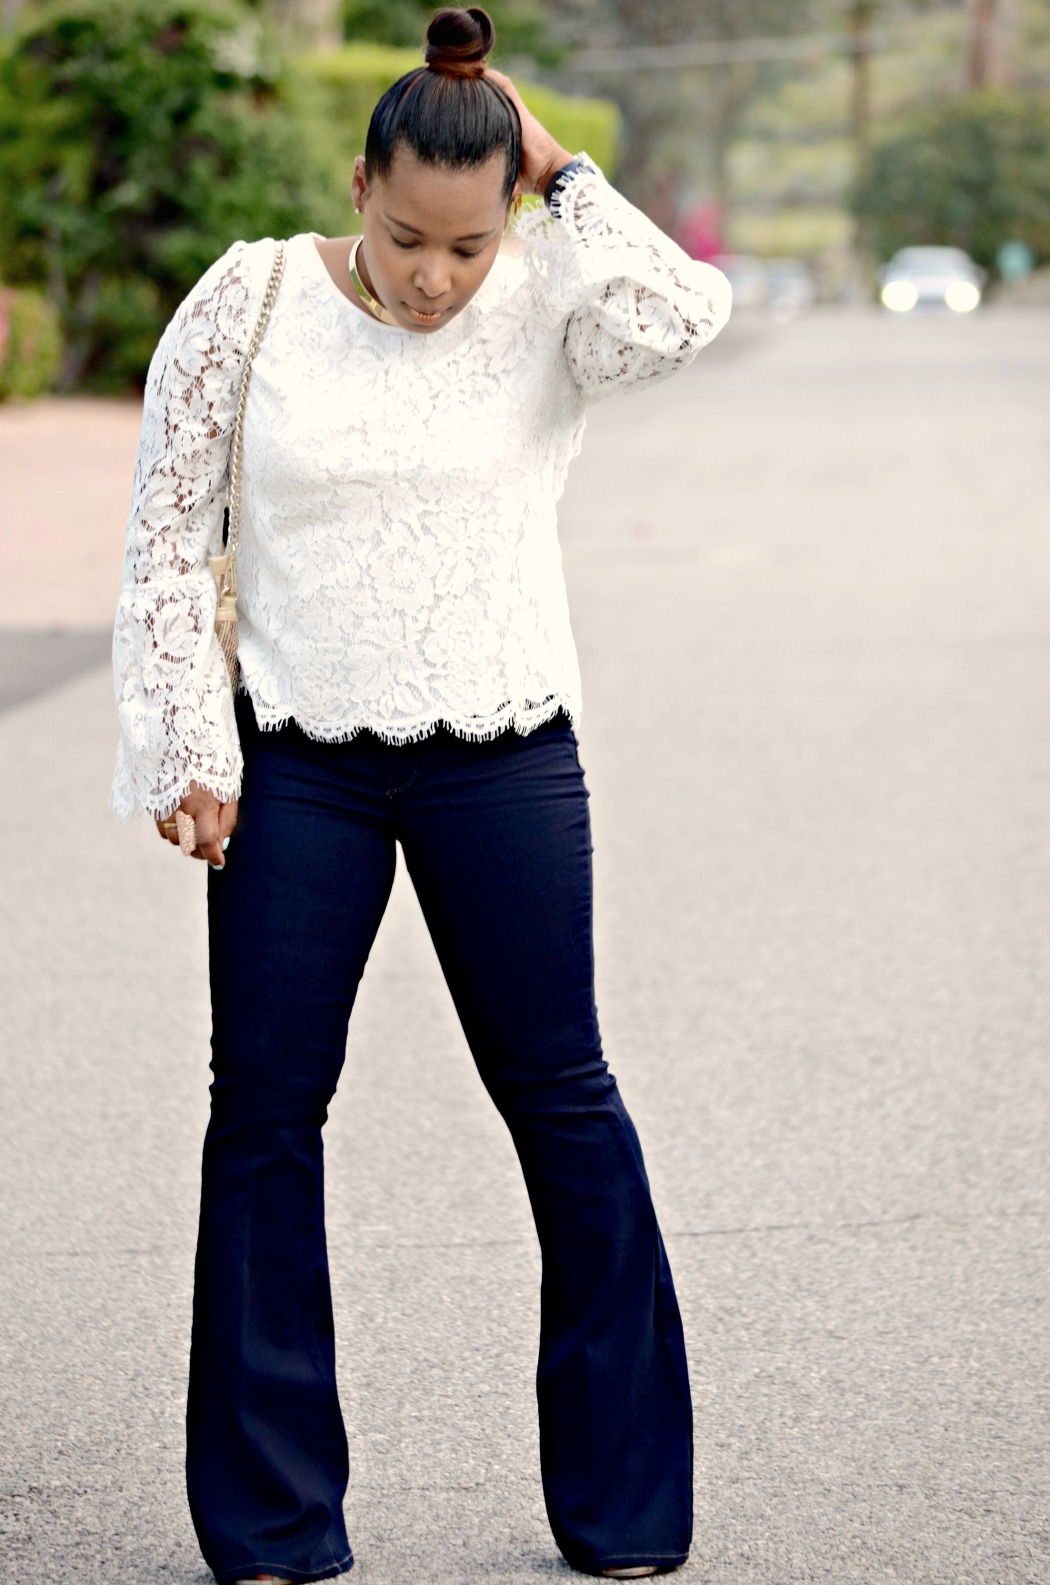 Michael Kors Lace Blouse Scalloped Edged_Paige Bootleg Flare Denim Pants_Top Knot_Hairstyle